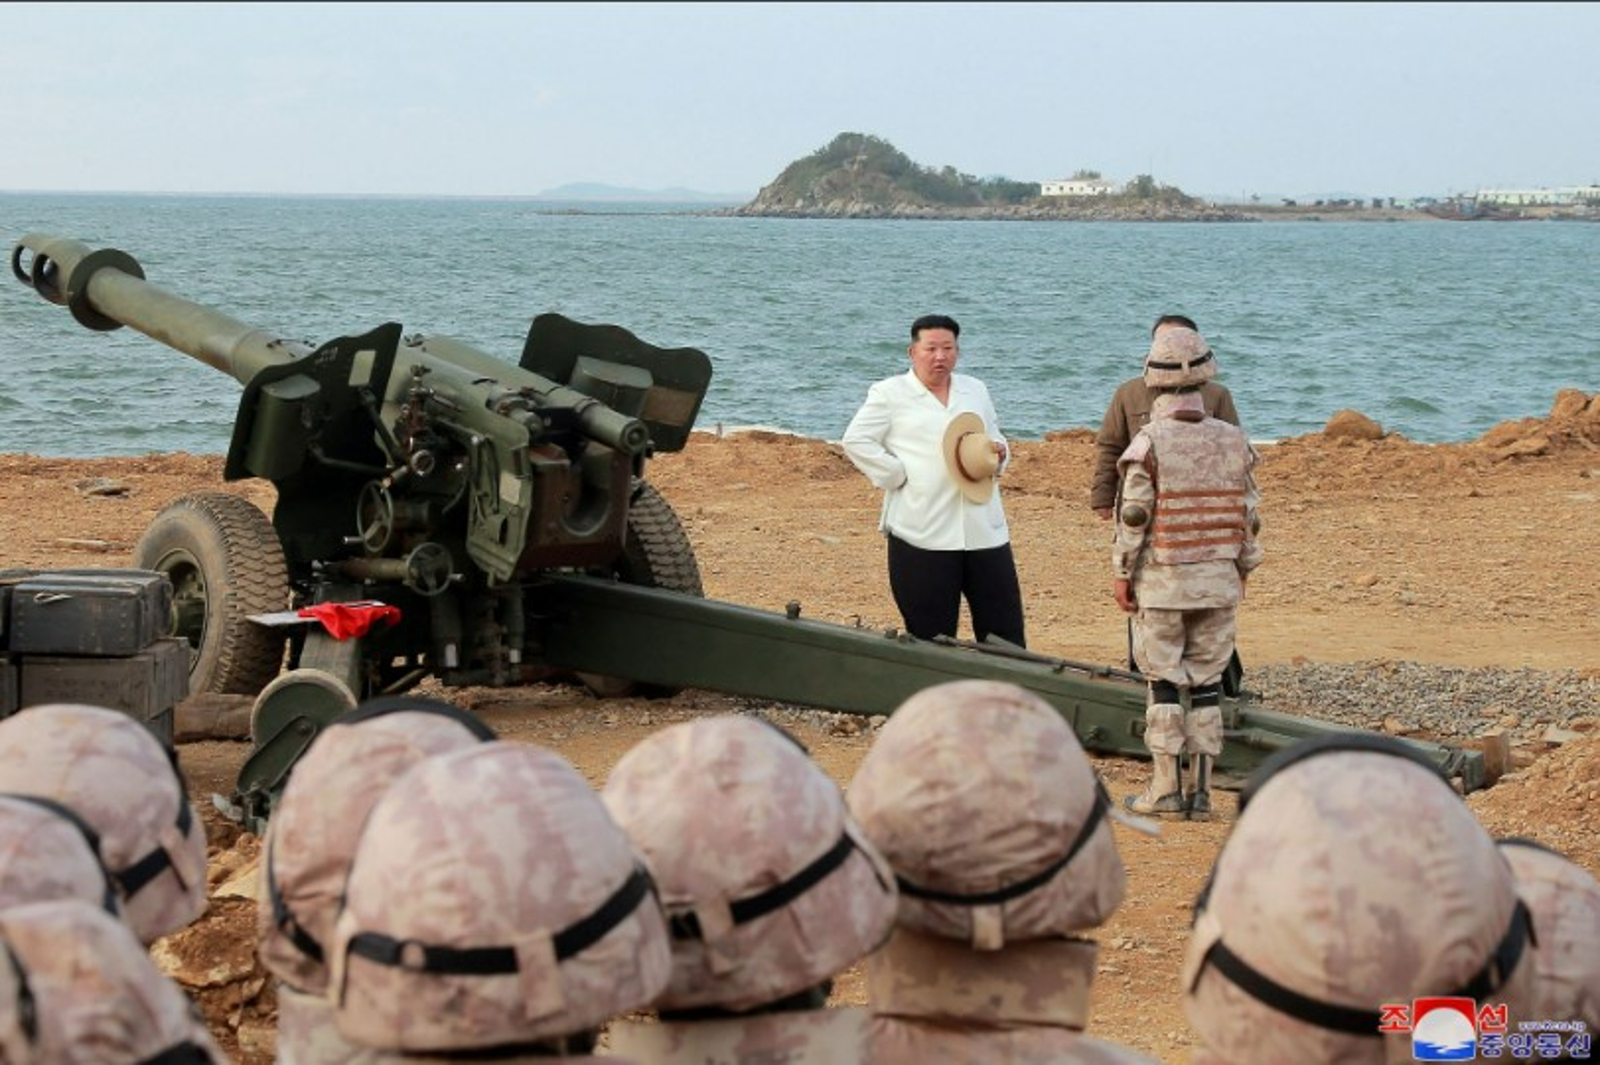 North Korea's leader Kim Jong Un oversees military drills at an undisclosed location in North Korea.